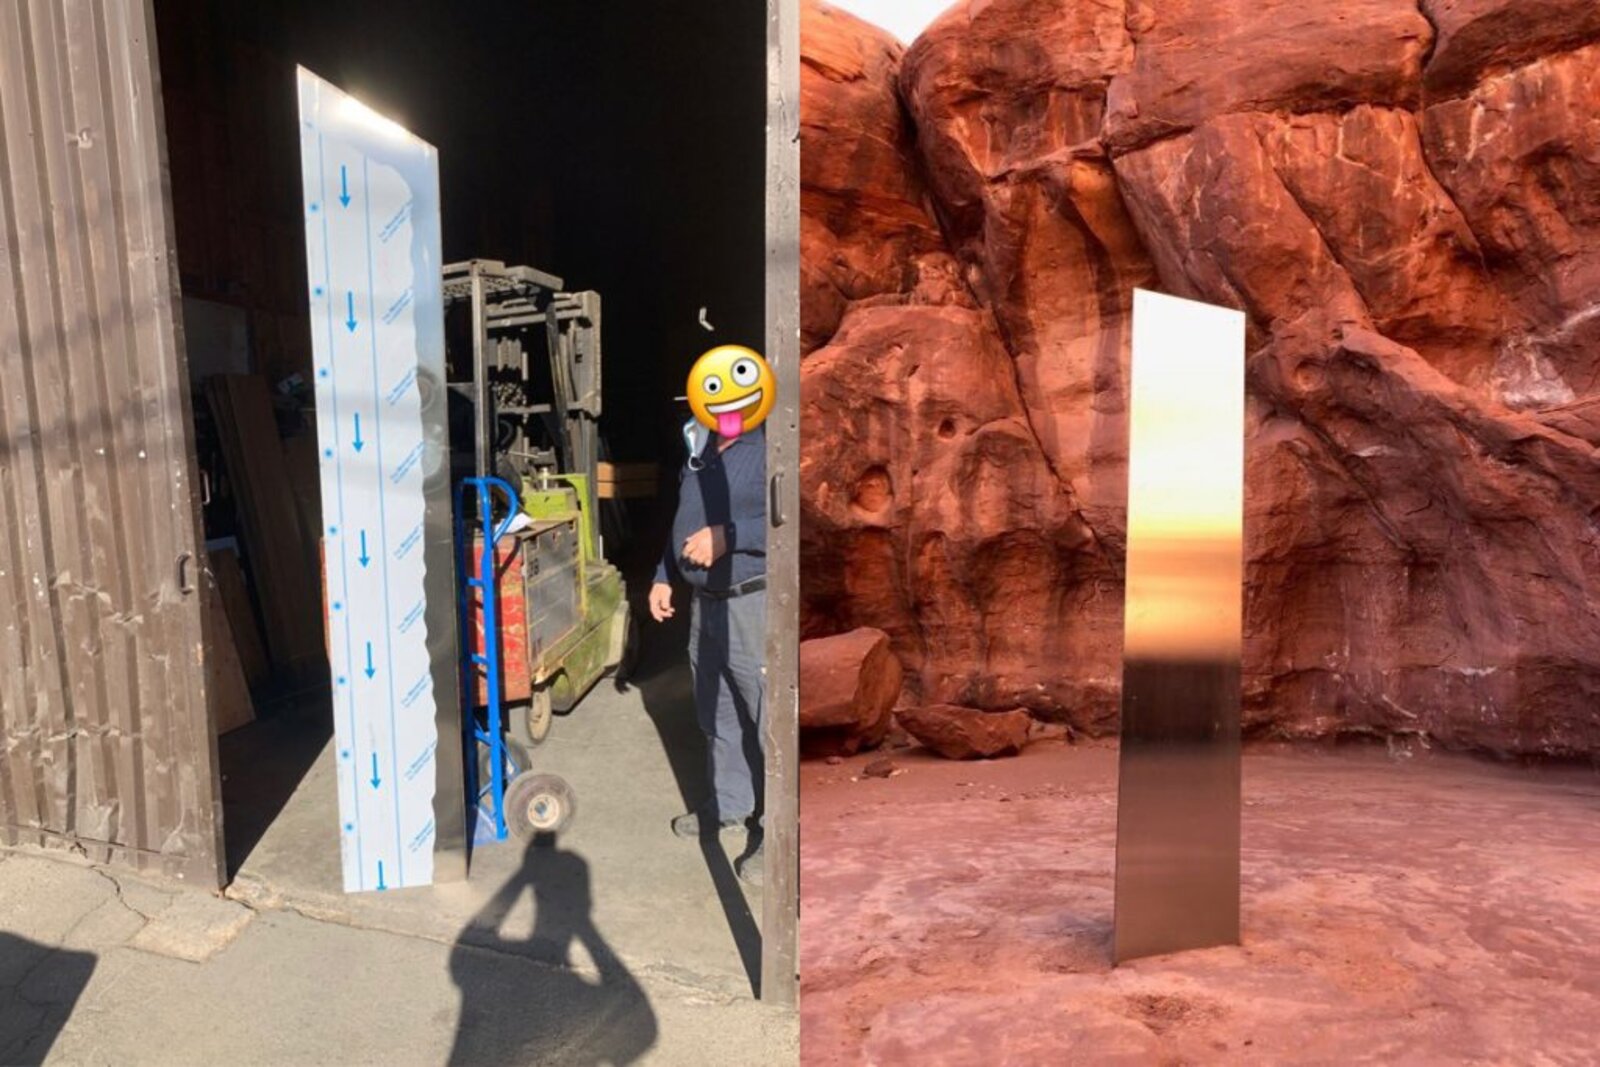 The phenomenon known as the Utah monolith has been appearing all over the globe, and now has popped up in California. We're guessing where it goes next. 